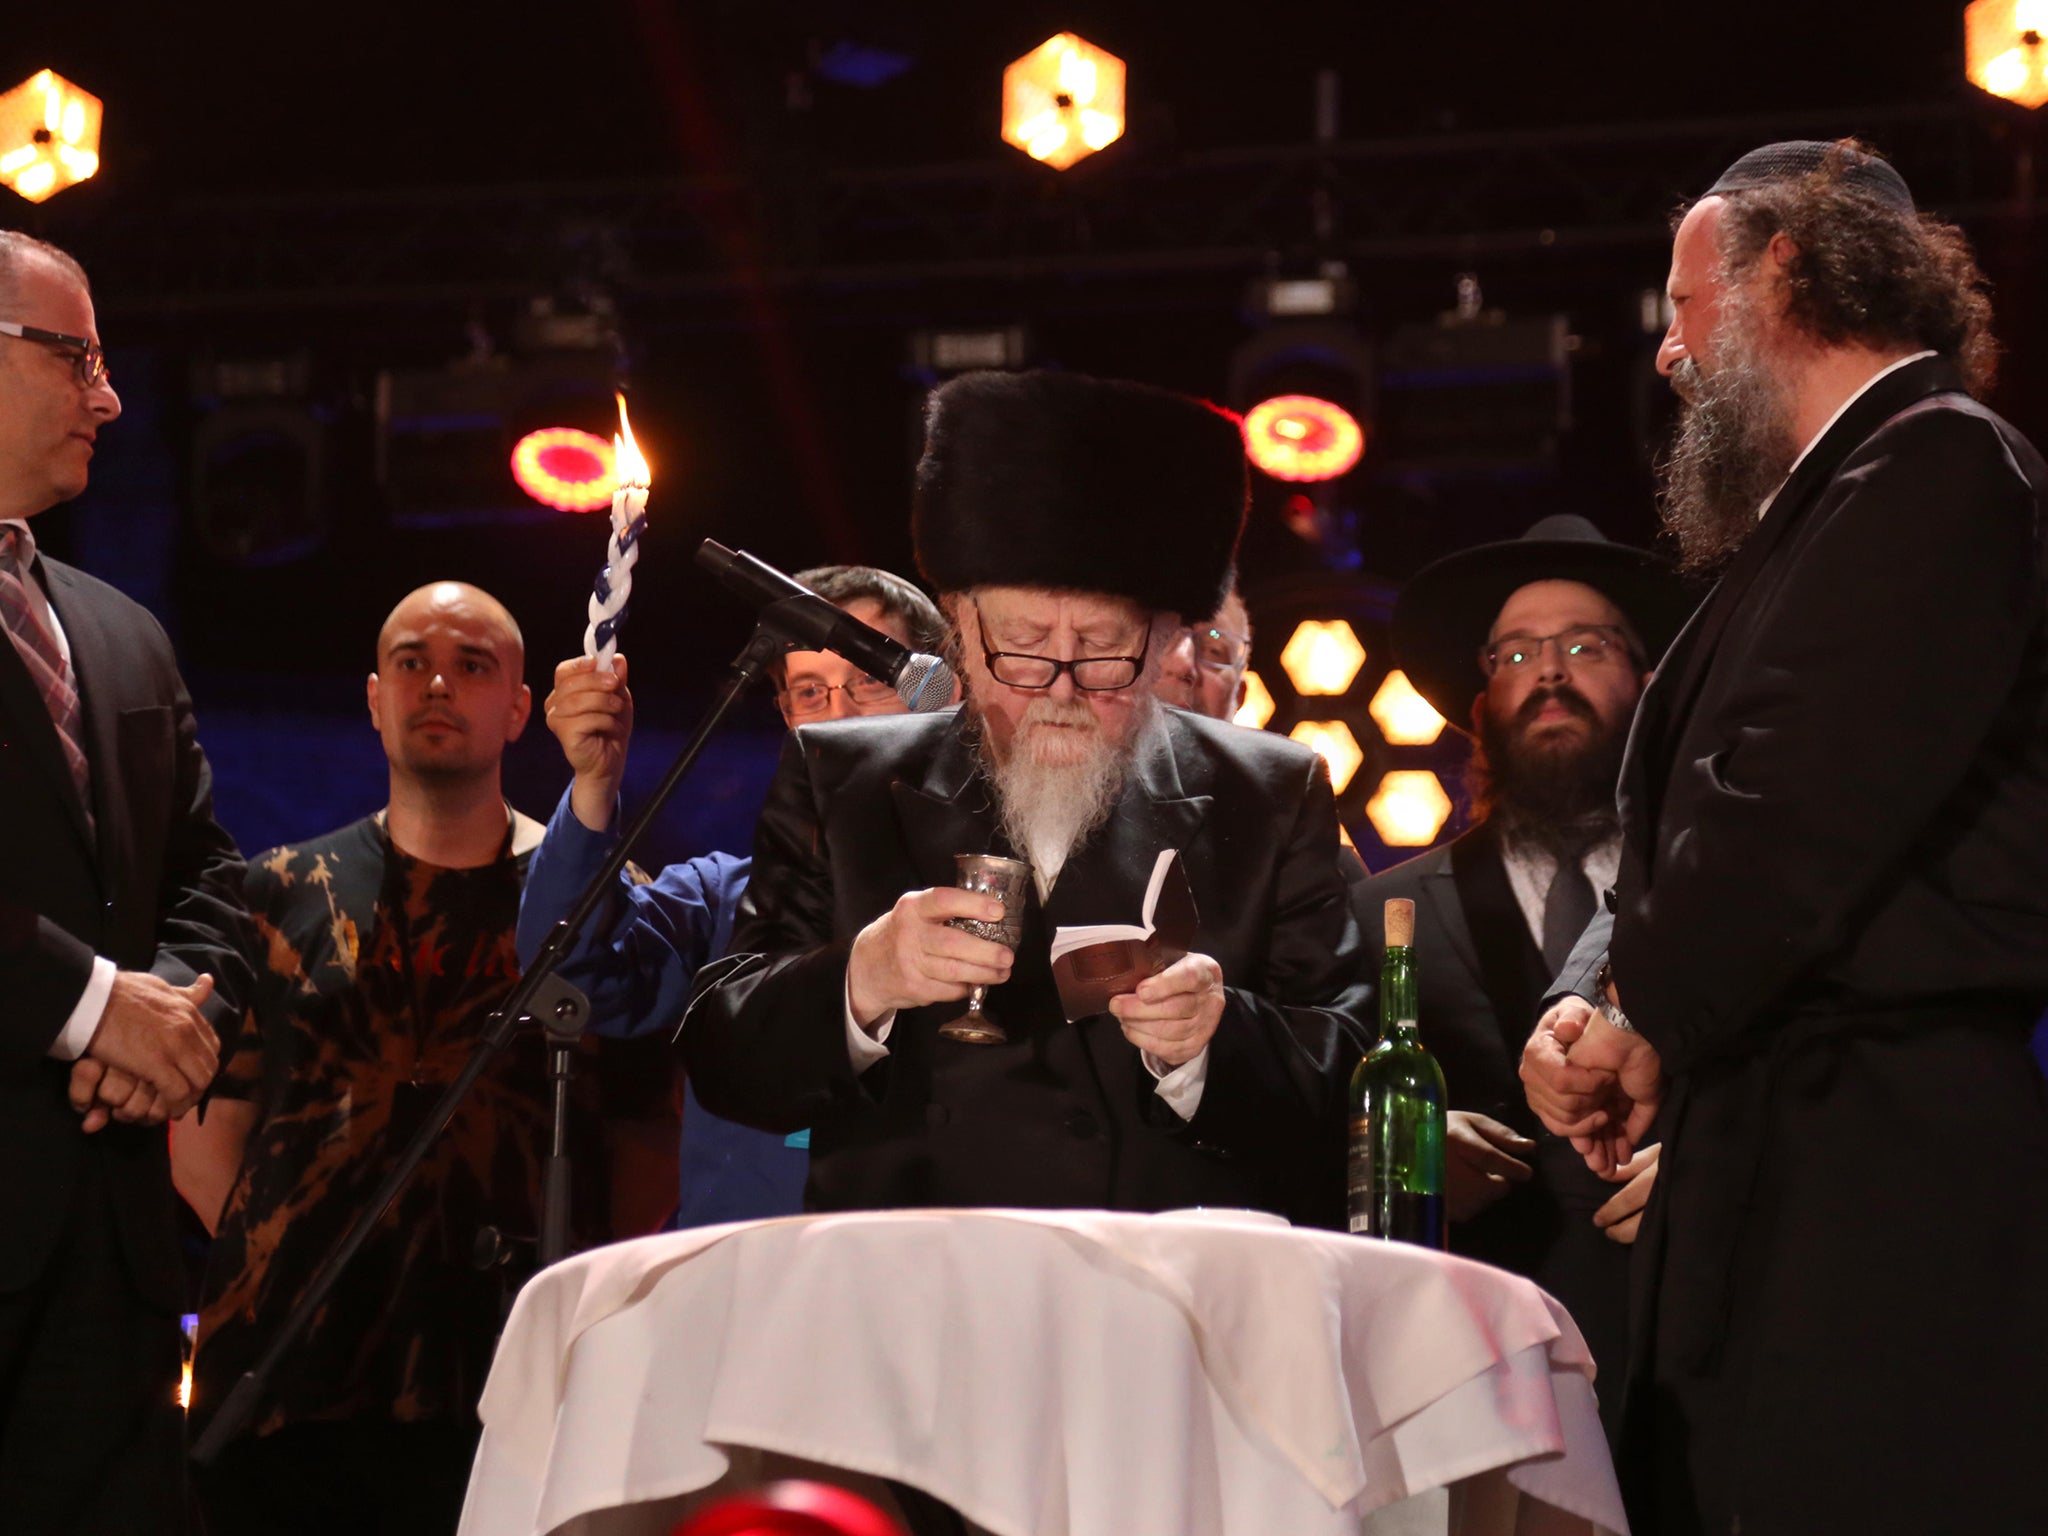 Krakow’s Jewish Culture Festival is the largest of its kind in Europe